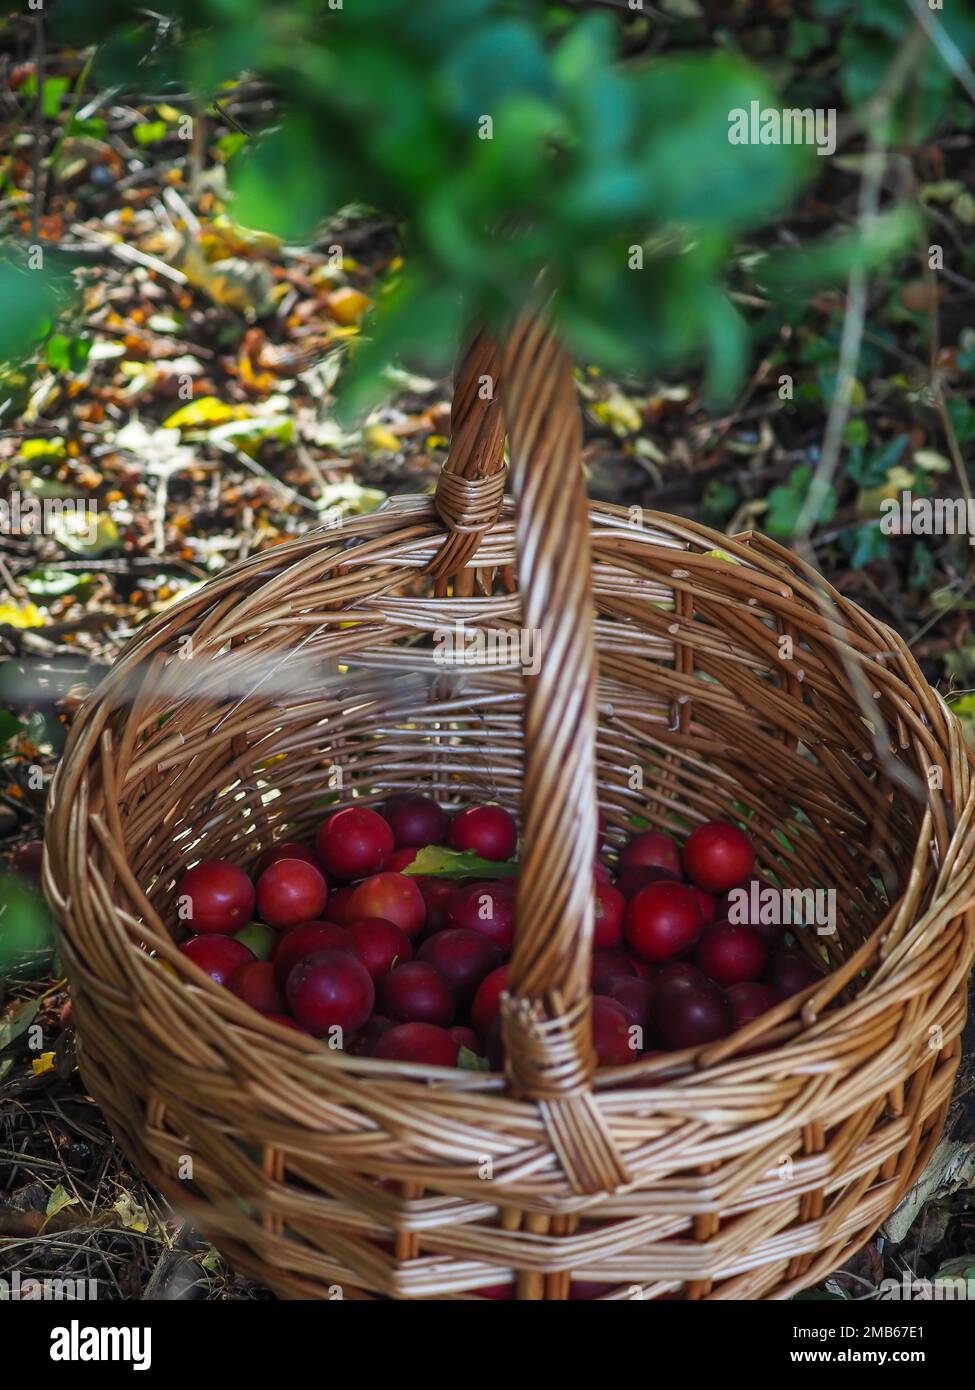 Wicker basket of foraged red cherry plums sitting in the undergrowth of a hedgerow or wood in the British countryside (fruit of Prunus cerasifera) Stock Photo